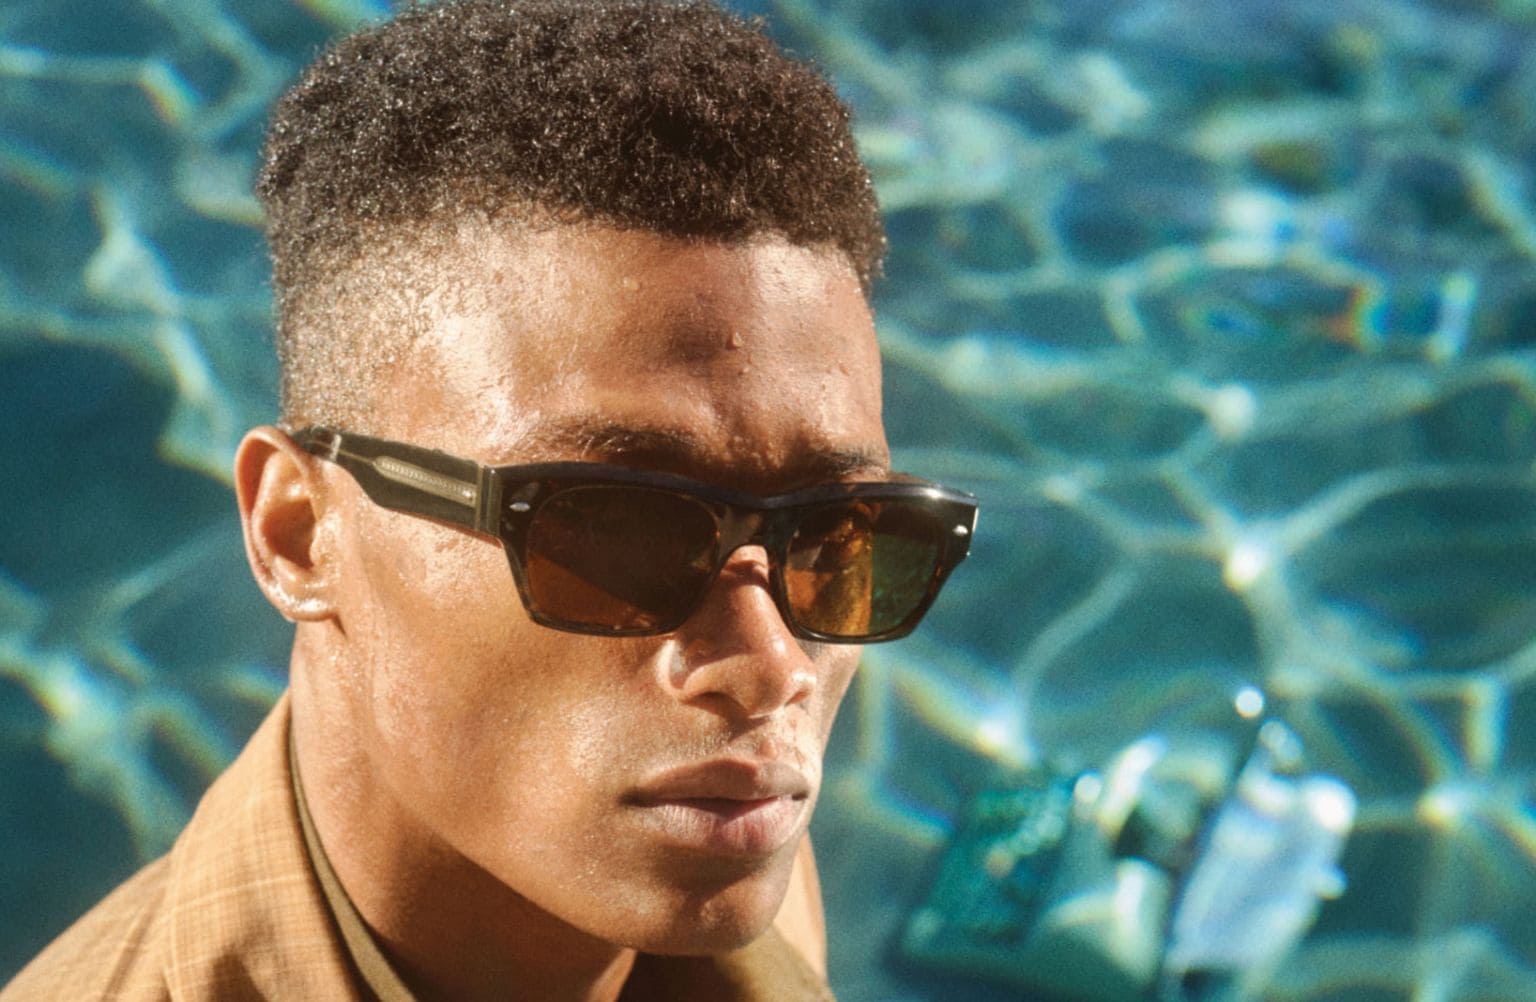 Oliver Peoples x Brunello Cucinelli Folding Sunglasses | Uncrate Supply-mncb.edu.vn